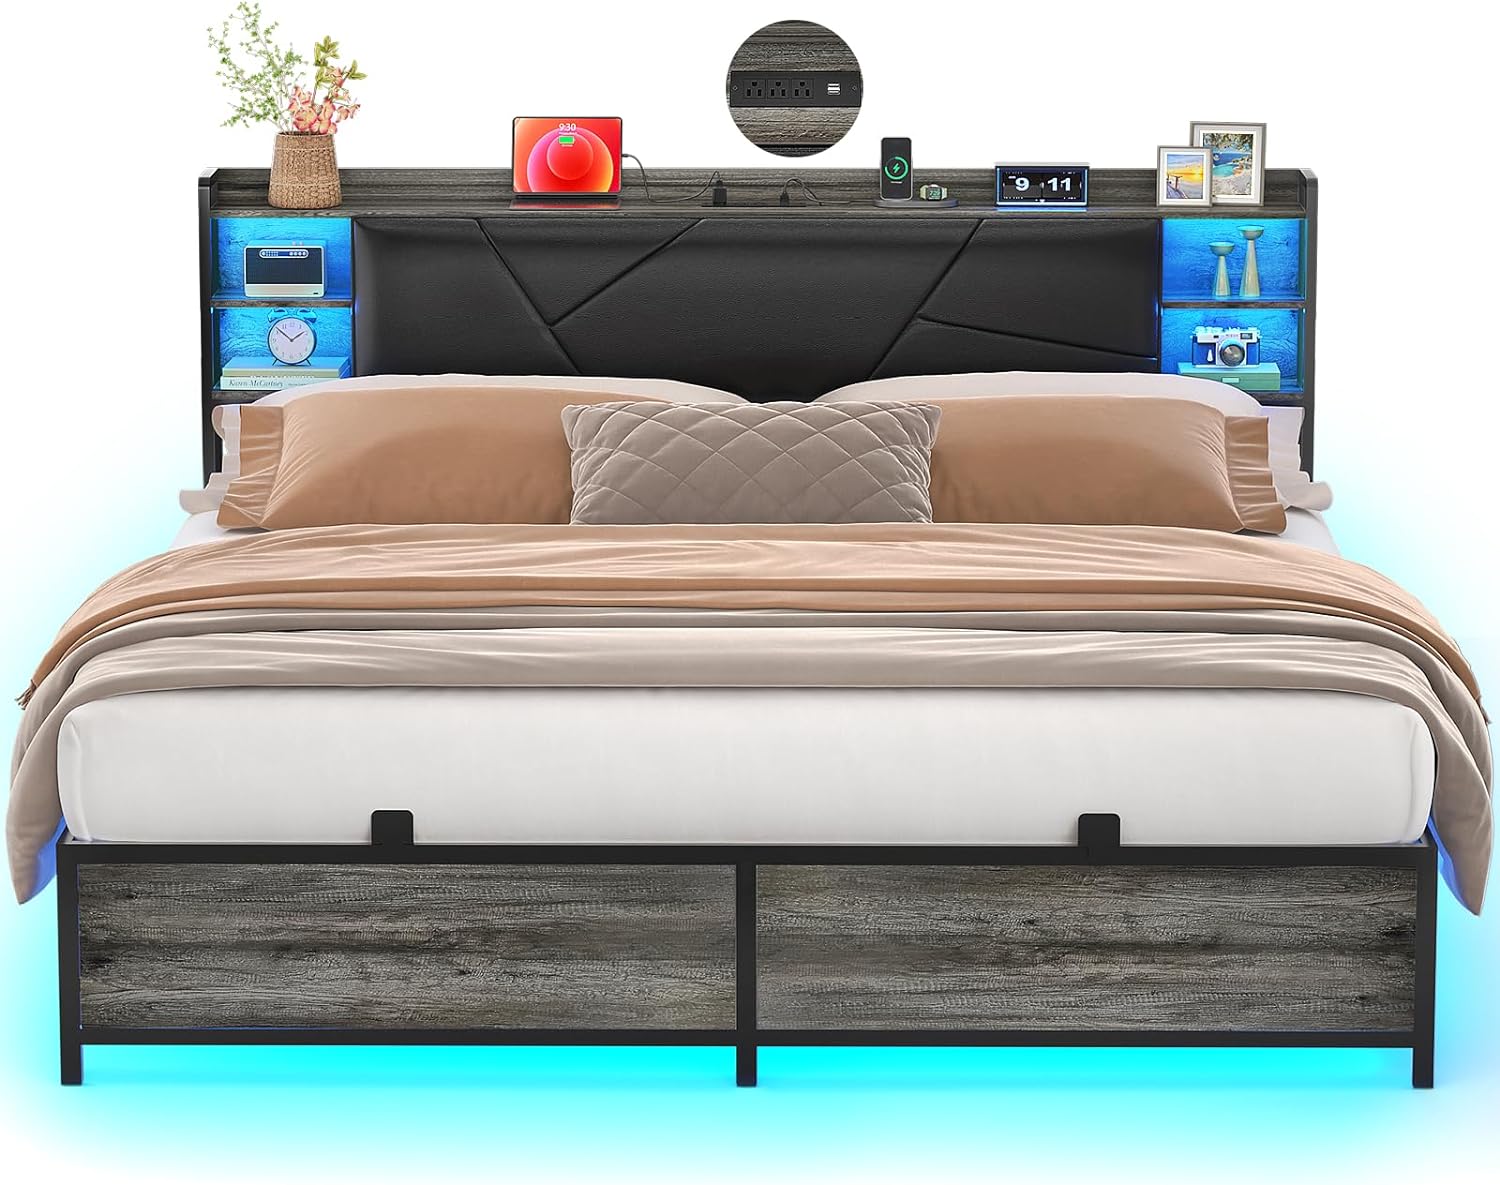 Unikito King Size Bed Frame with Cool RGB LED Lights and Power Outlets, Sturdy Platform Bed with Storage Upholstered Headboard, Noise Free, No Box Spring Needed, Easy to Assemble, Black Oak